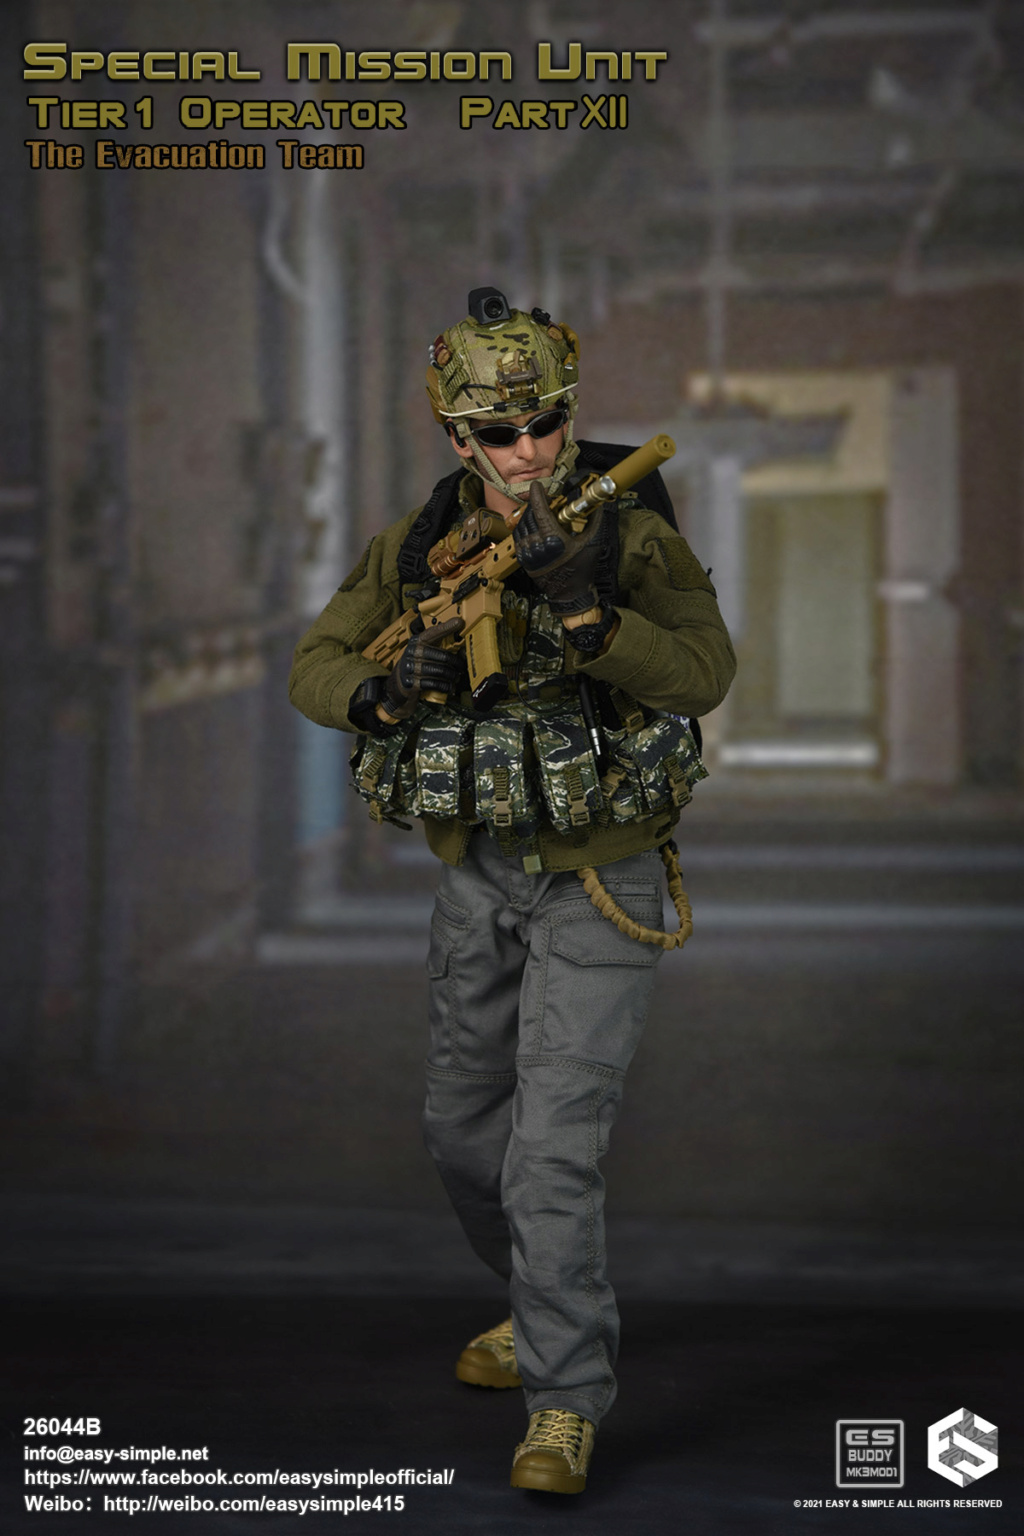 NEW PRODUCT: Easy&Simple: 26044B Special Mission Unit Tier1 Operator Part XII The Evacuation Team 940a2210